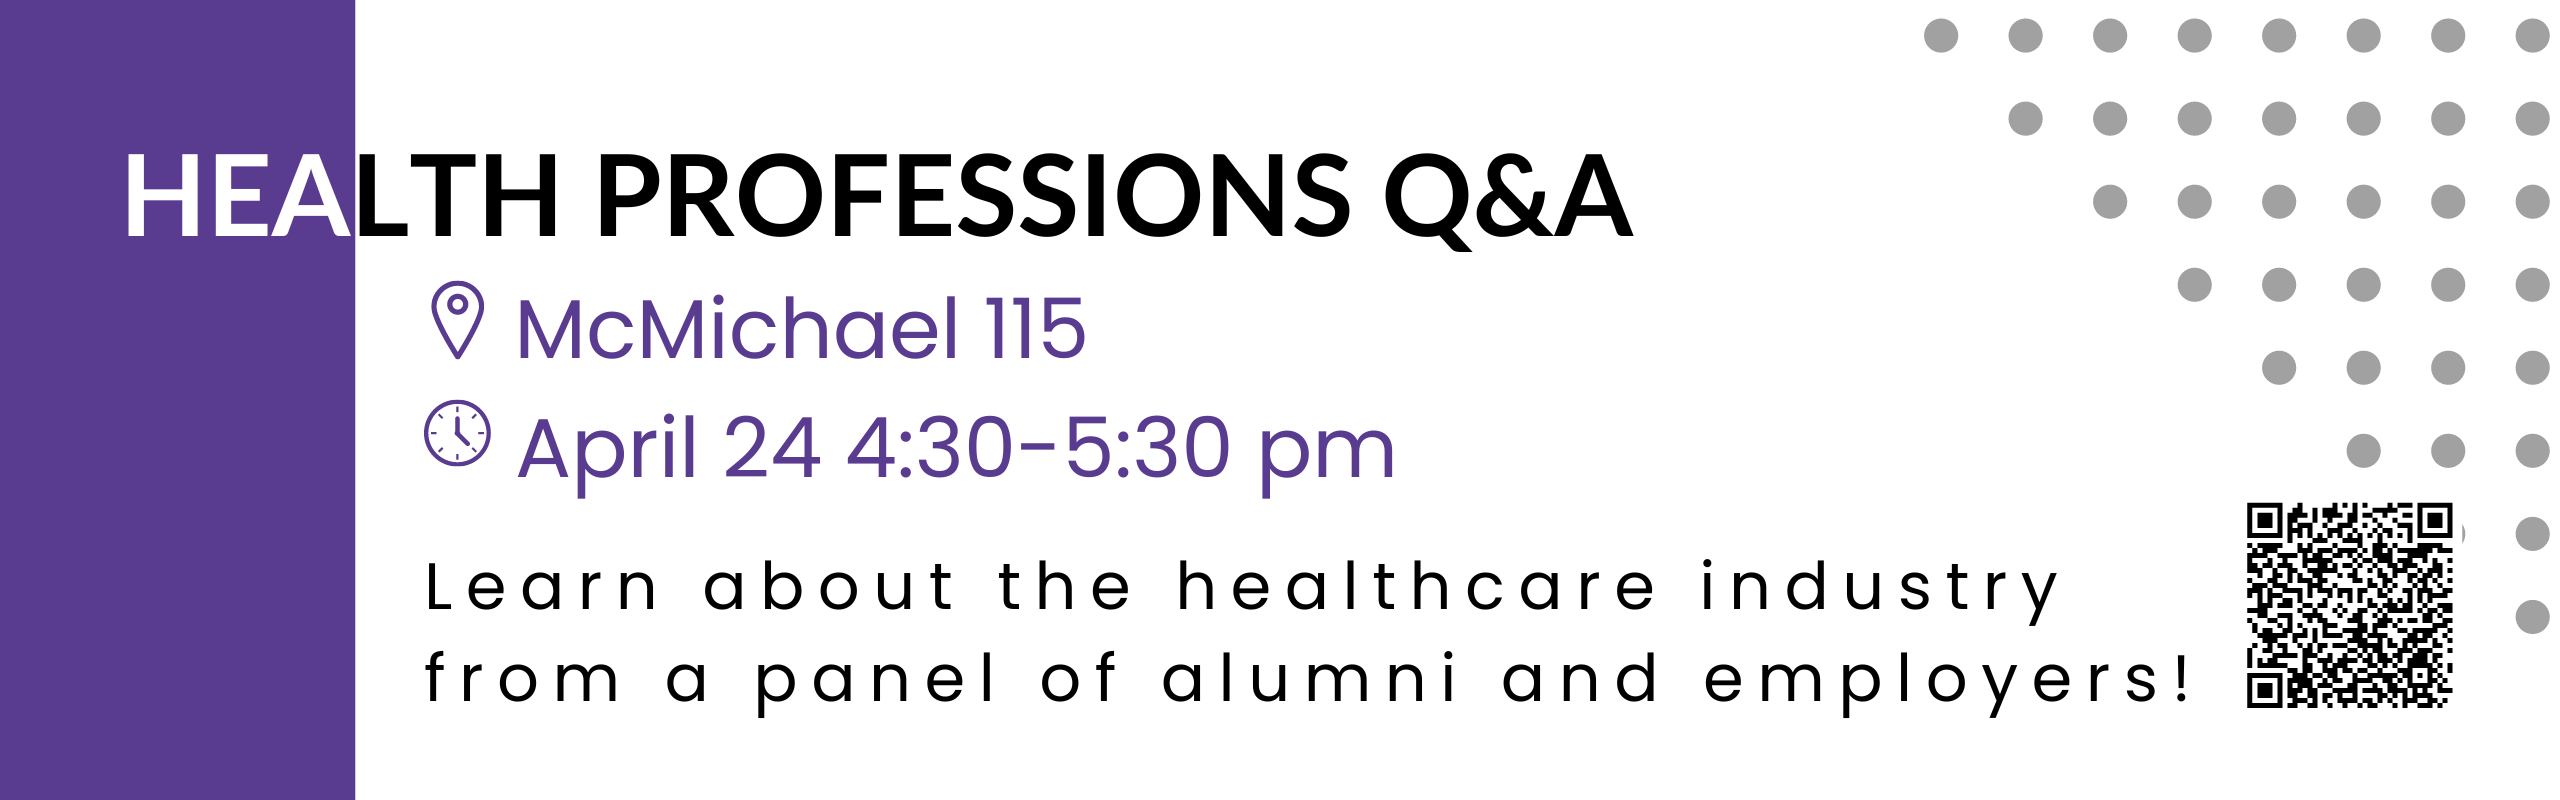 Health and Healthcare Professions Q&A on April 24. See EJN for more details.